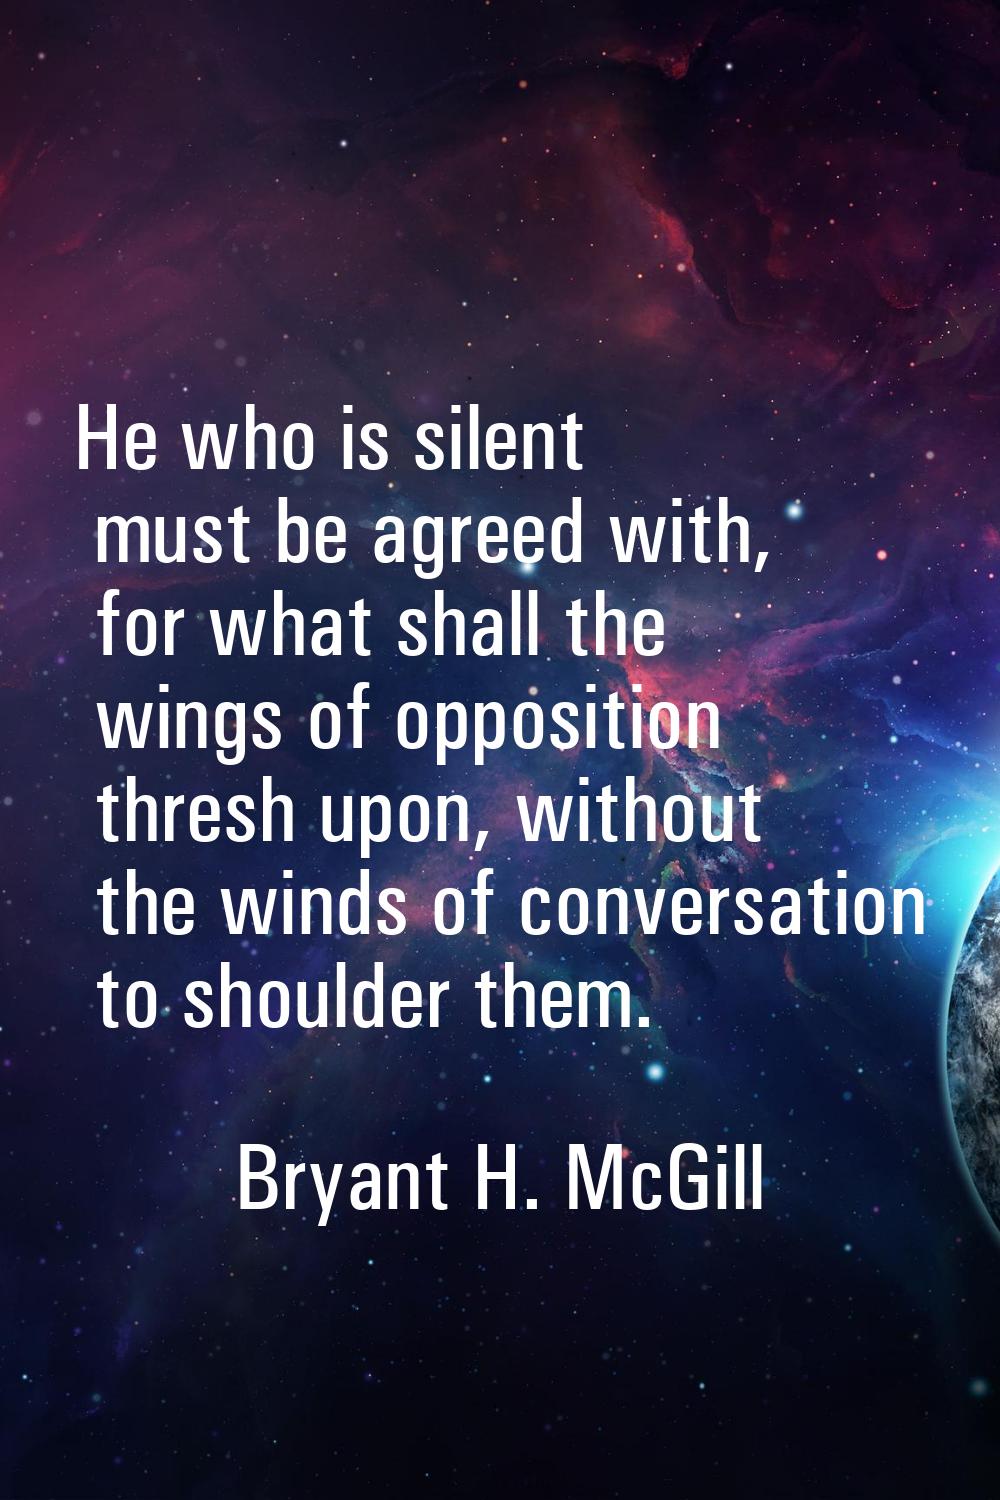 He who is silent must be agreed with, for what shall the wings of opposition thresh upon, without t